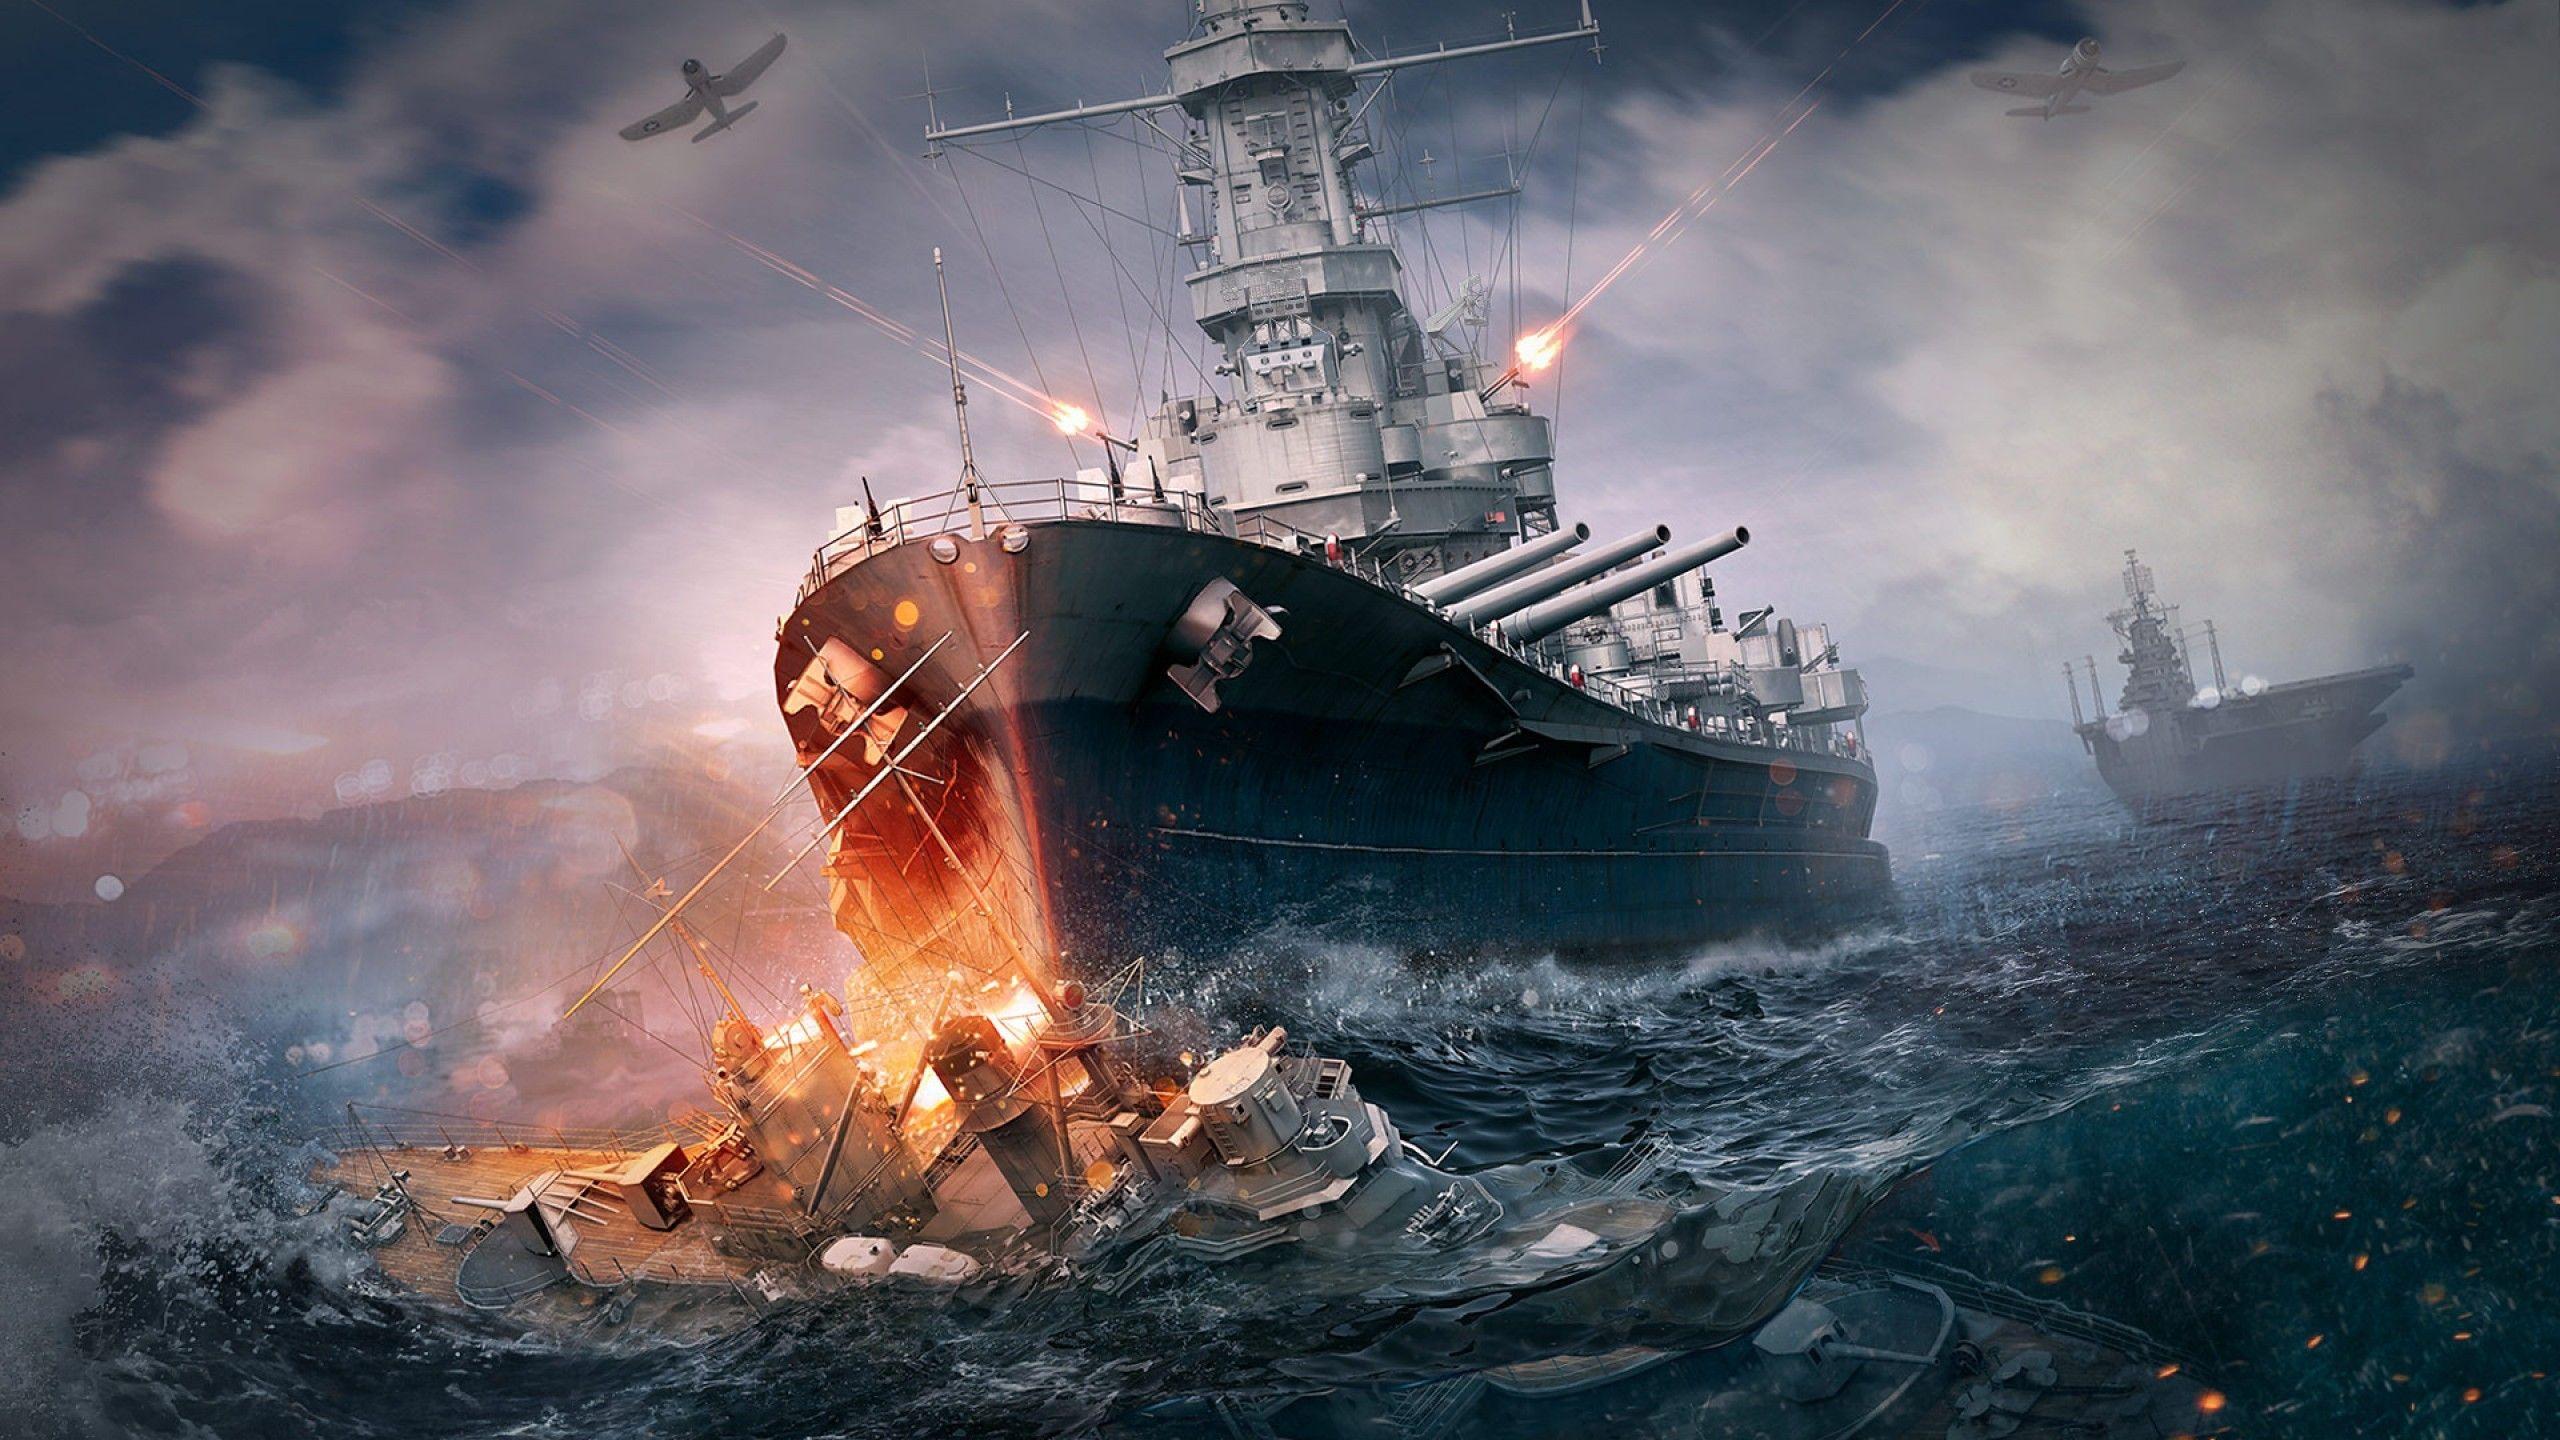 Video Game World Of Warships Wallpaper. WOW. World of warships